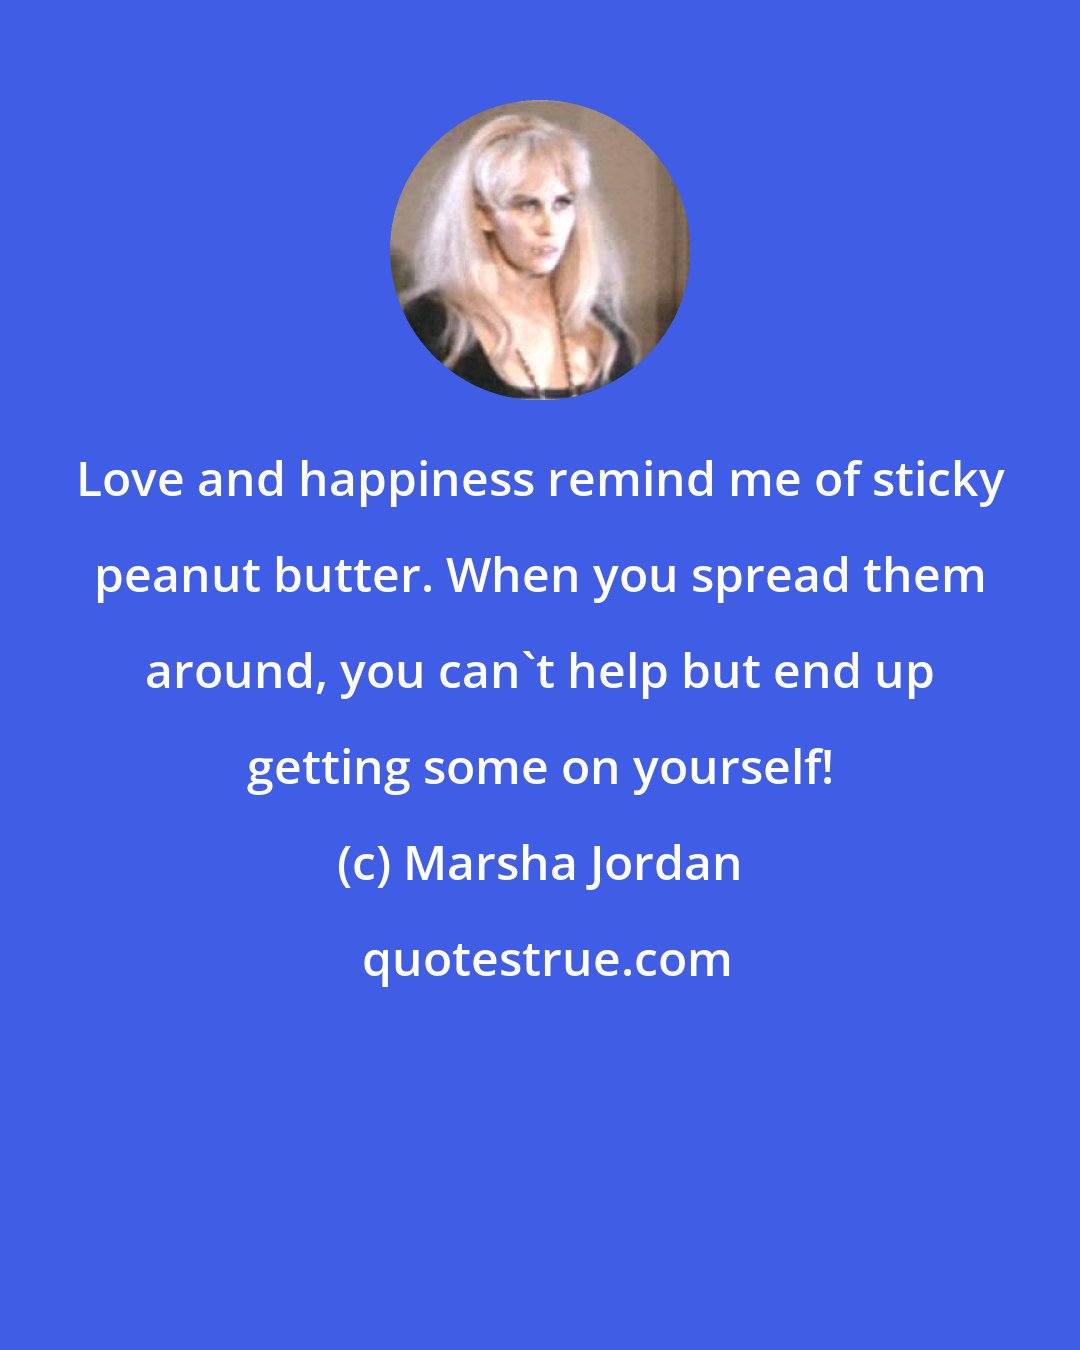 Marsha Jordan: Love and happiness remind me of sticky peanut butter. When you spread them around, you can't help but end up getting some on yourself!